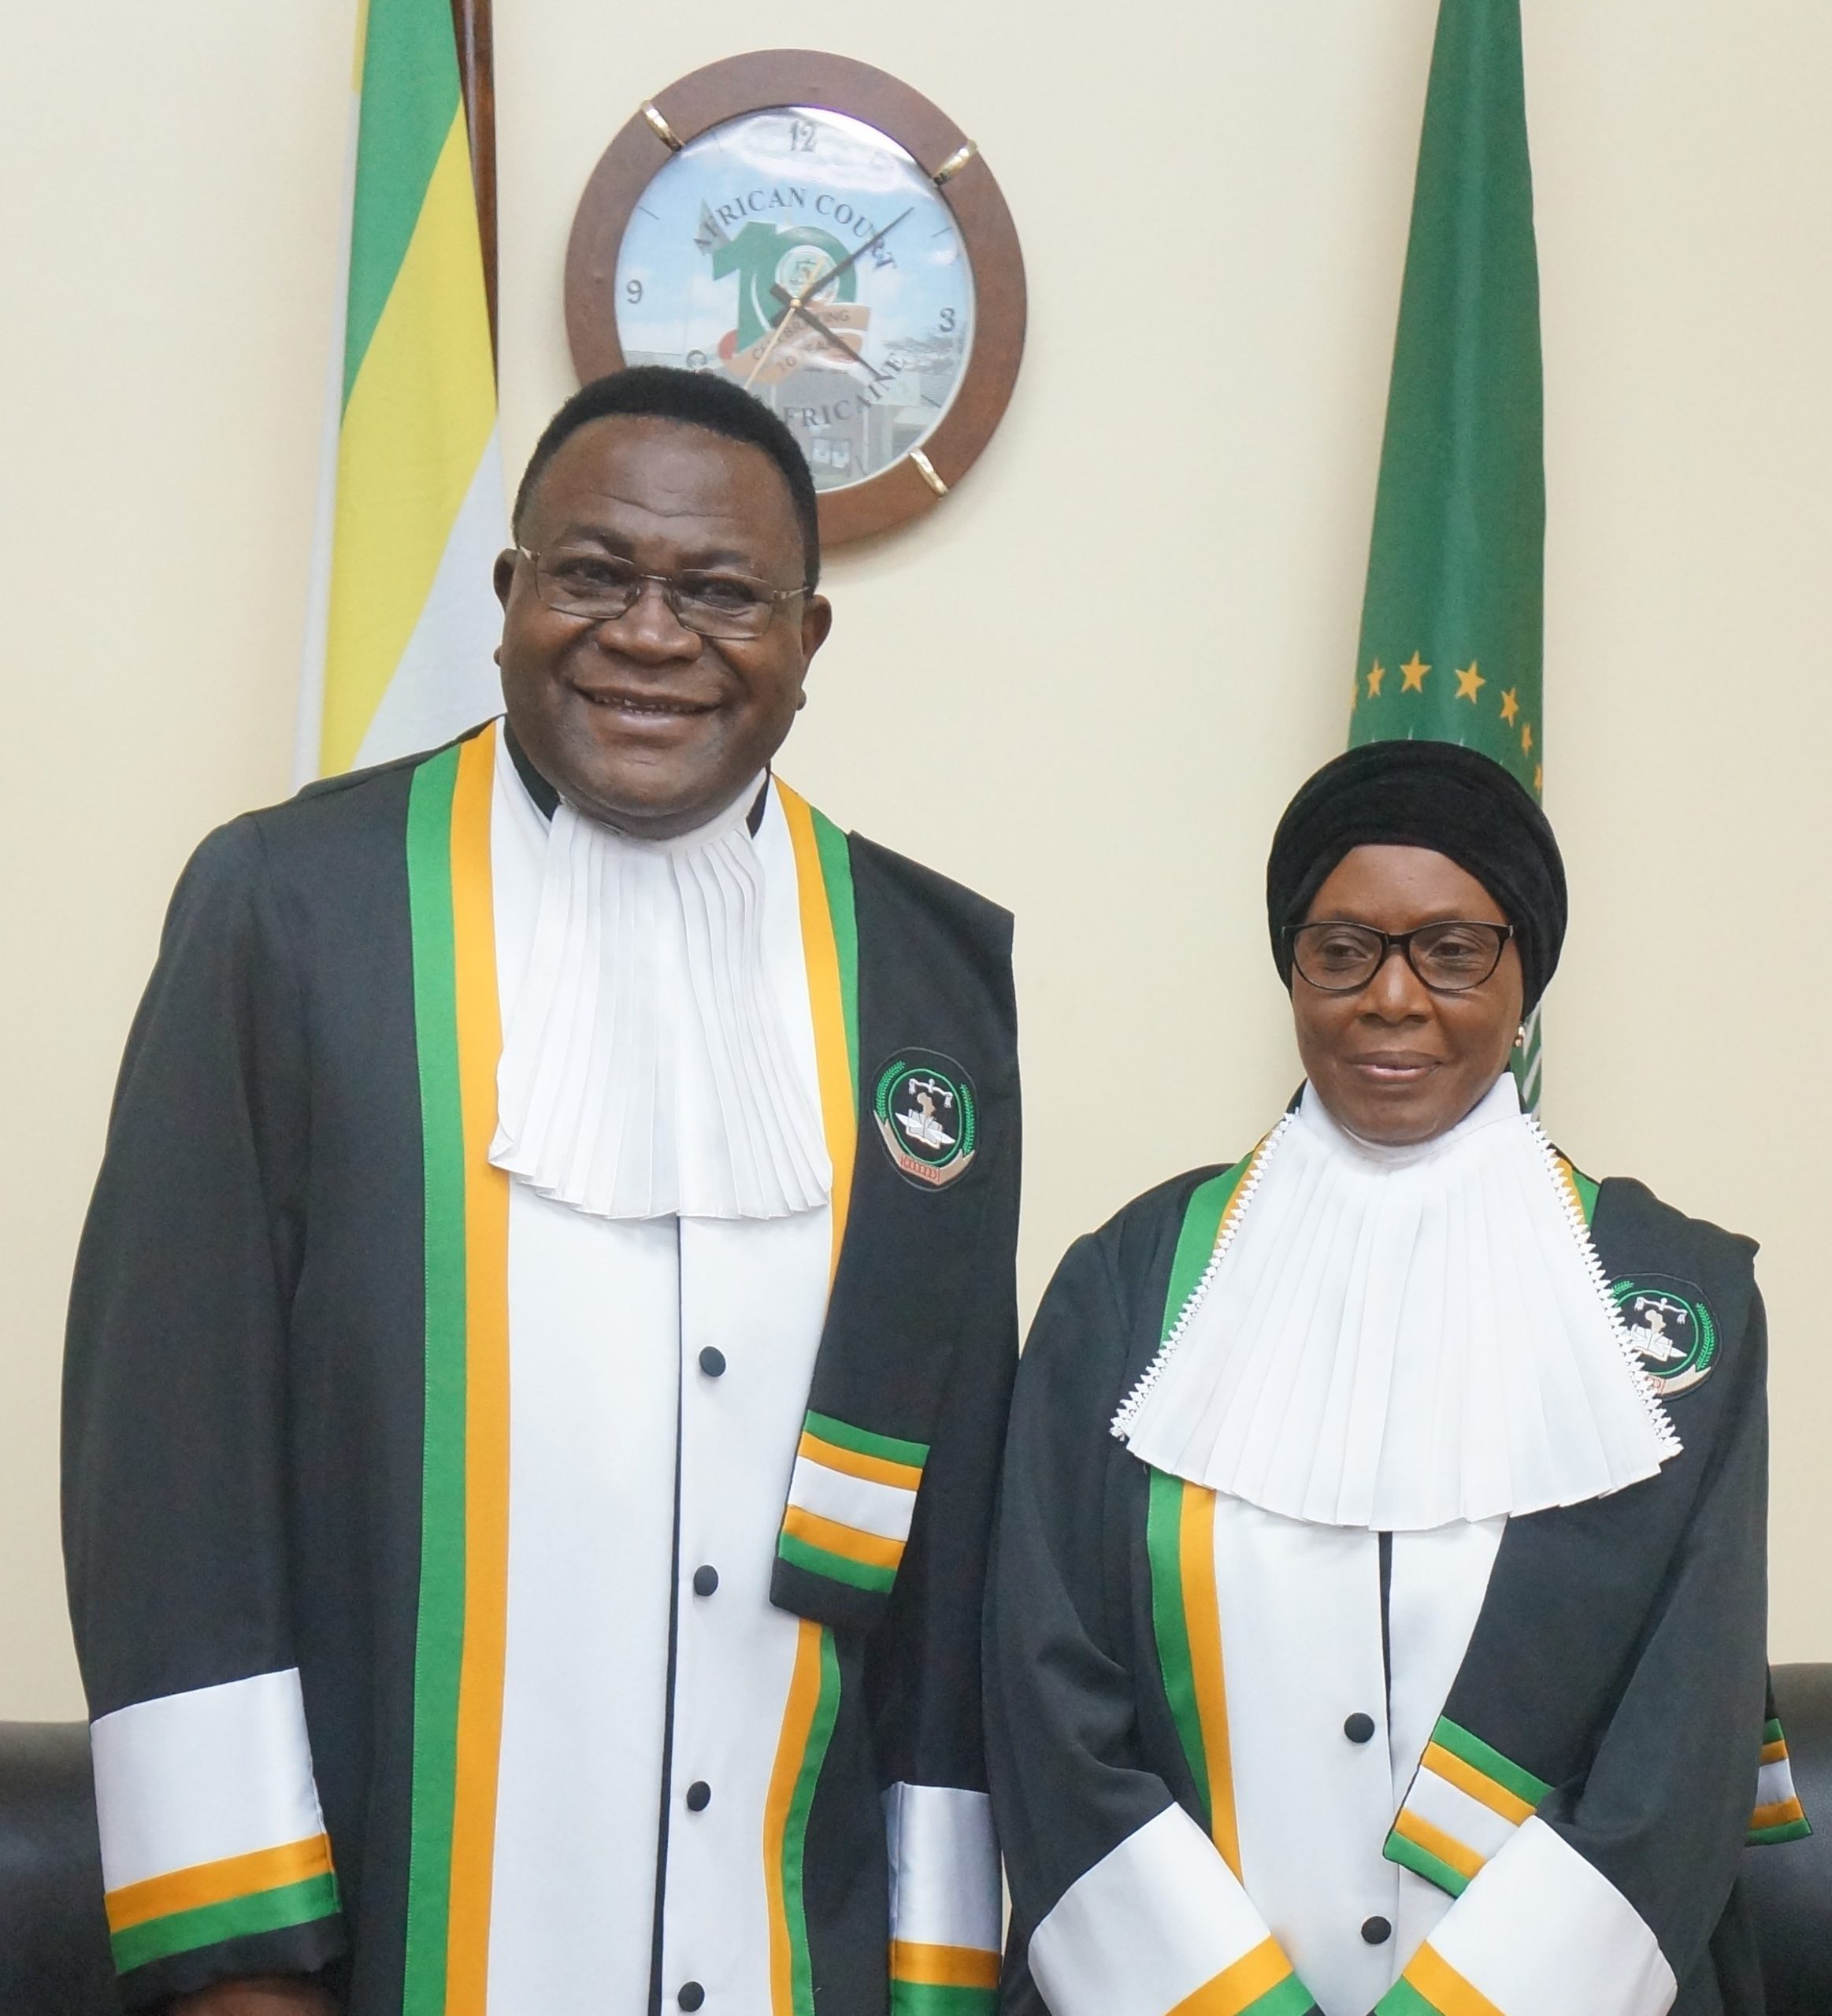 THE AFRICAN COURT ON HUMAN AND PEOPLES’ RIGHTS ELECTS NEW PRESIDENT AND VICE-PRESIDENT